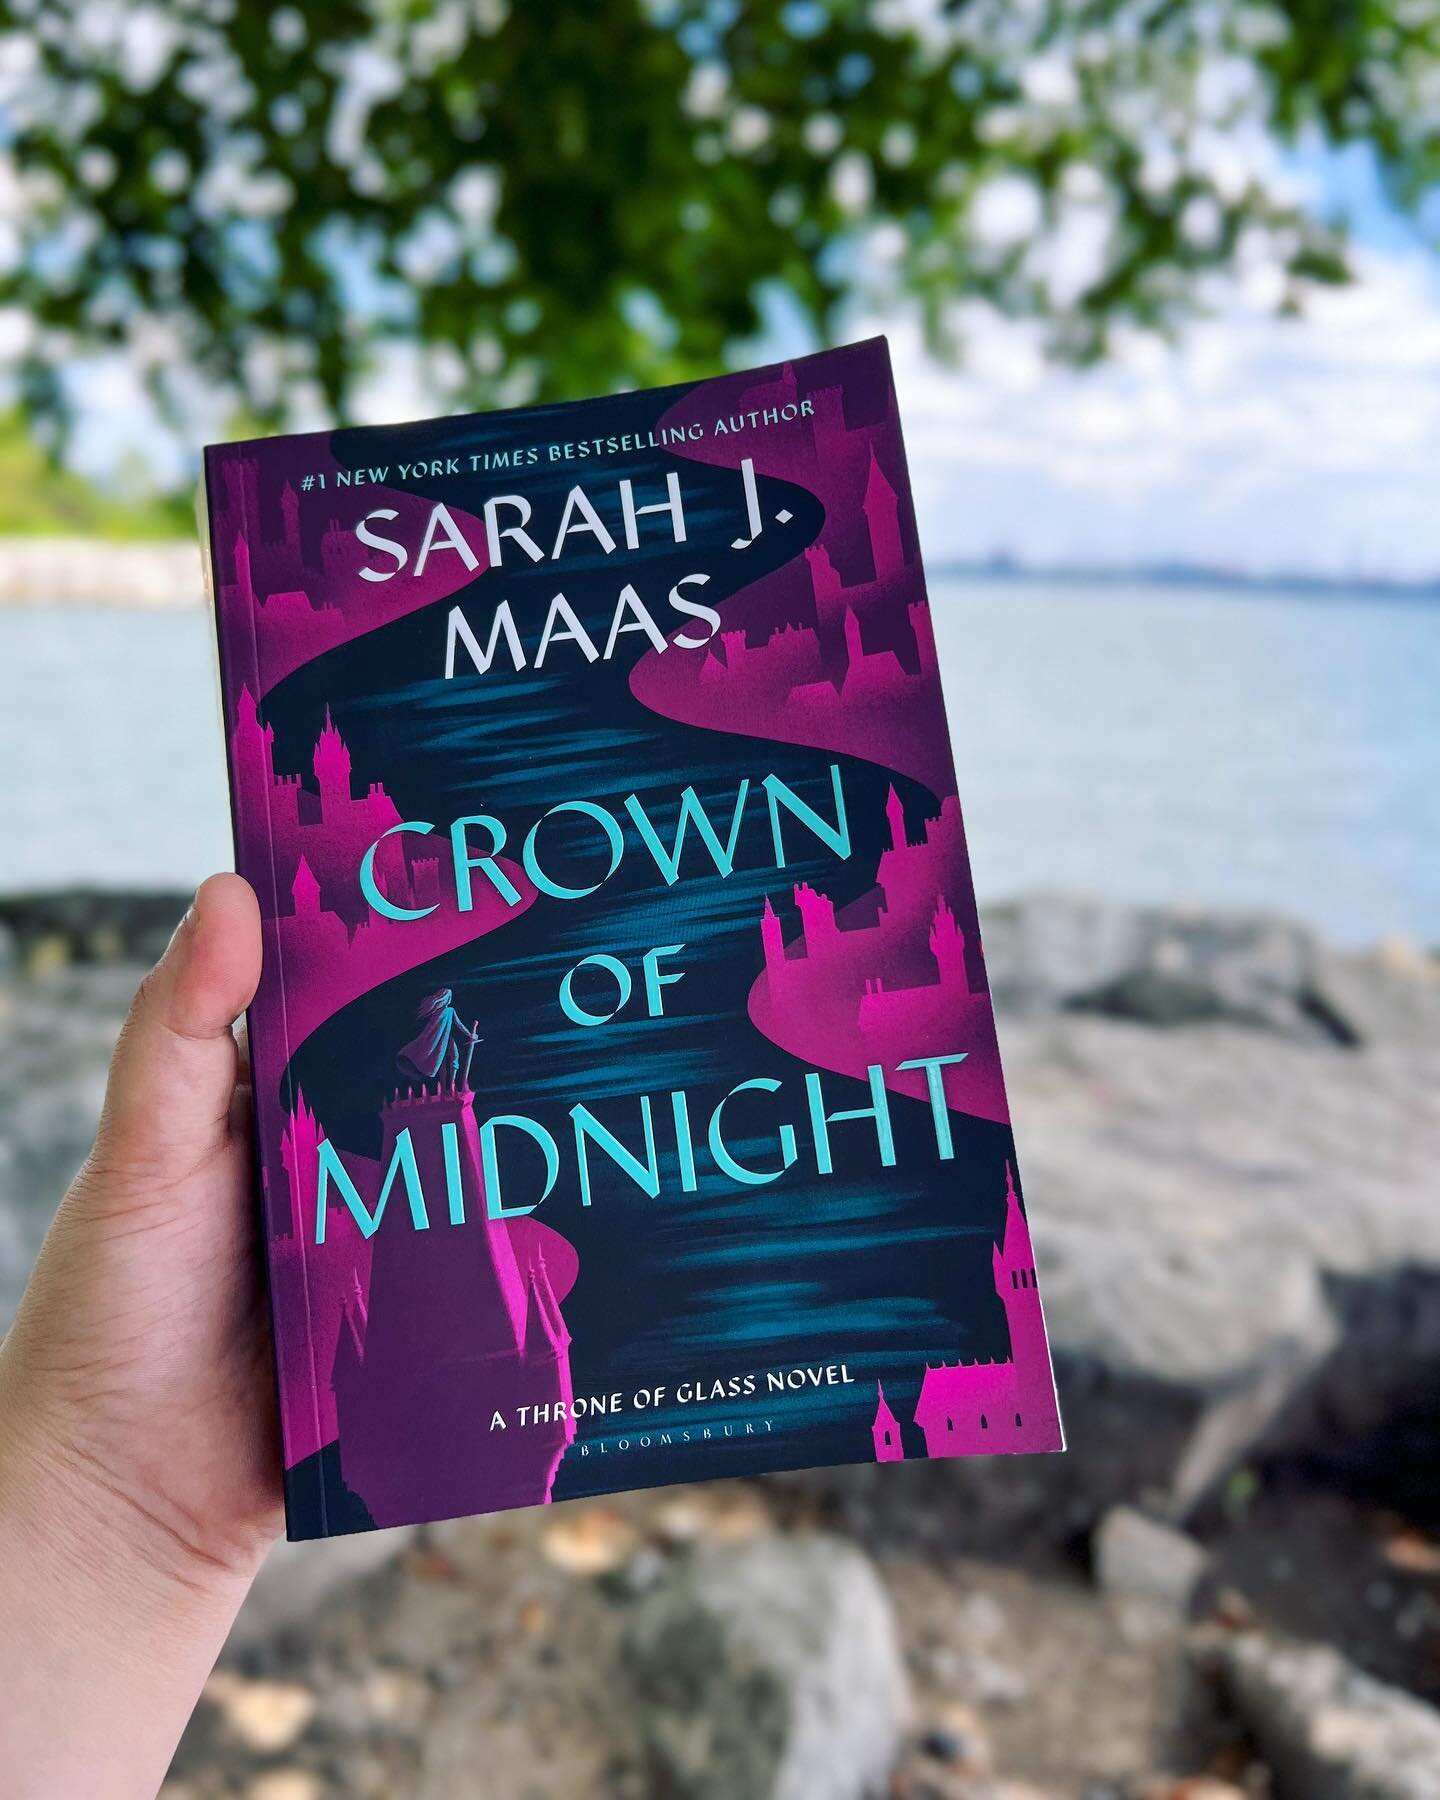 Spending my afternoon reading by the water. Really enjoying the #ThroneOfGlassSeries so far! 

Where&rsquo;s your favourite place to read?

#AmReading #Fantasy #SummerReading #SarahJMaas #Bookstagram